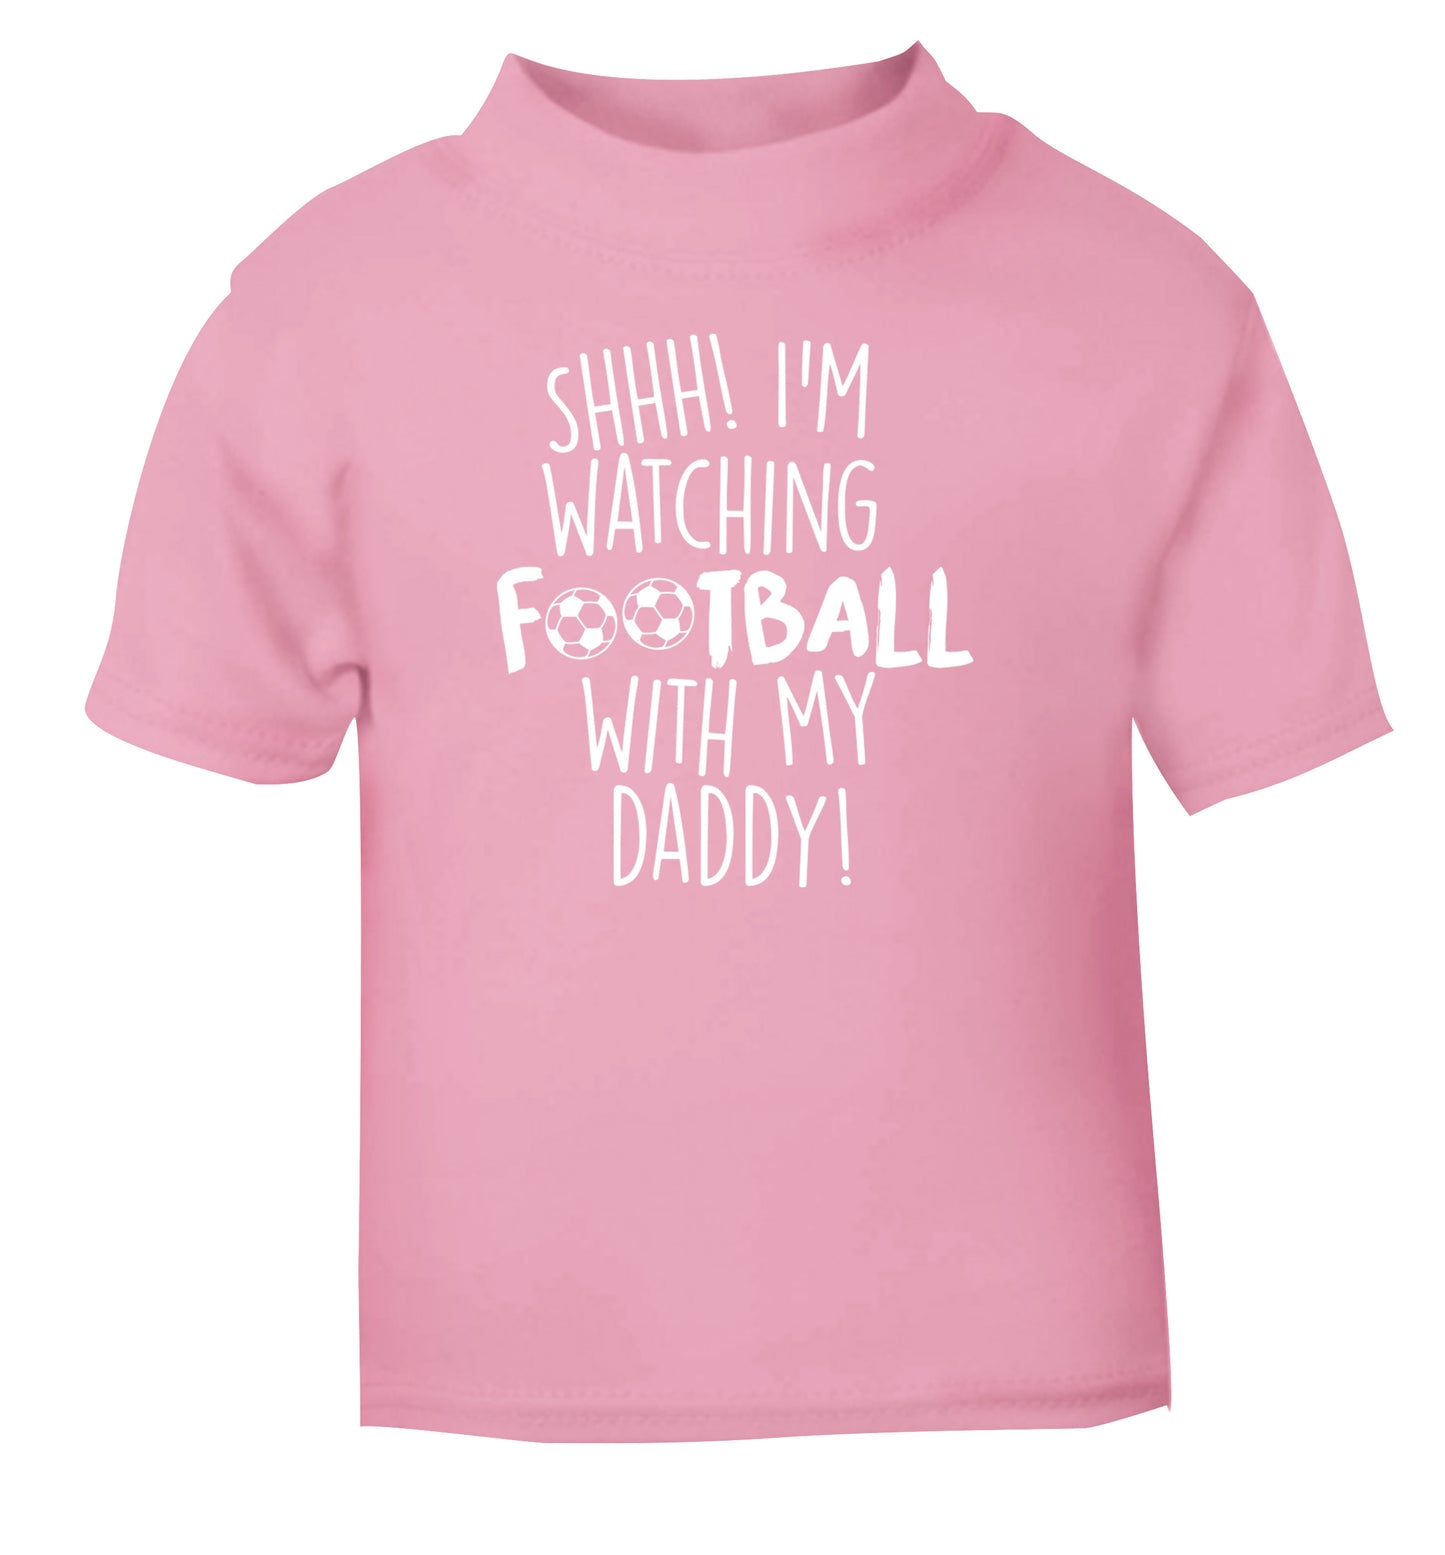 Shhh I'm watching football with my daddy light pink Baby Toddler Tshirt 2 Years